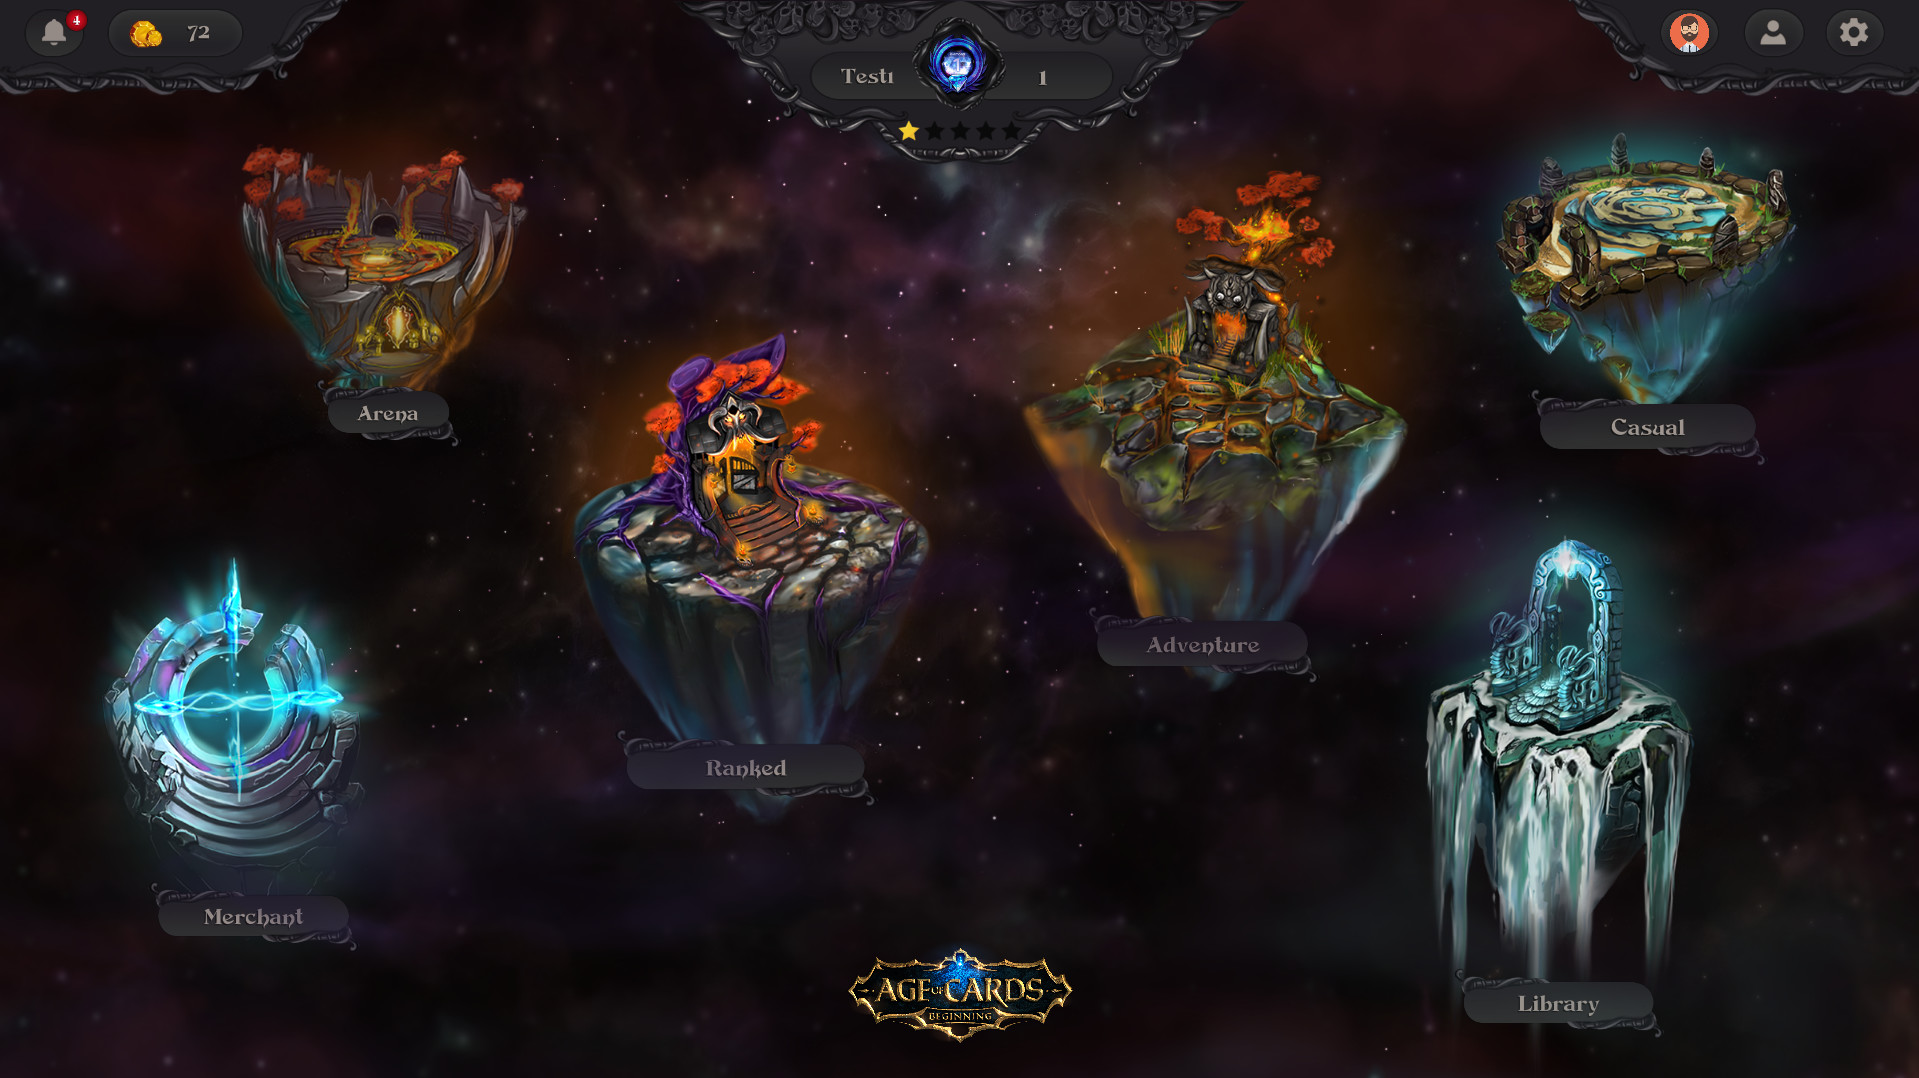 Age of Cards - Ra's Chess screenshot